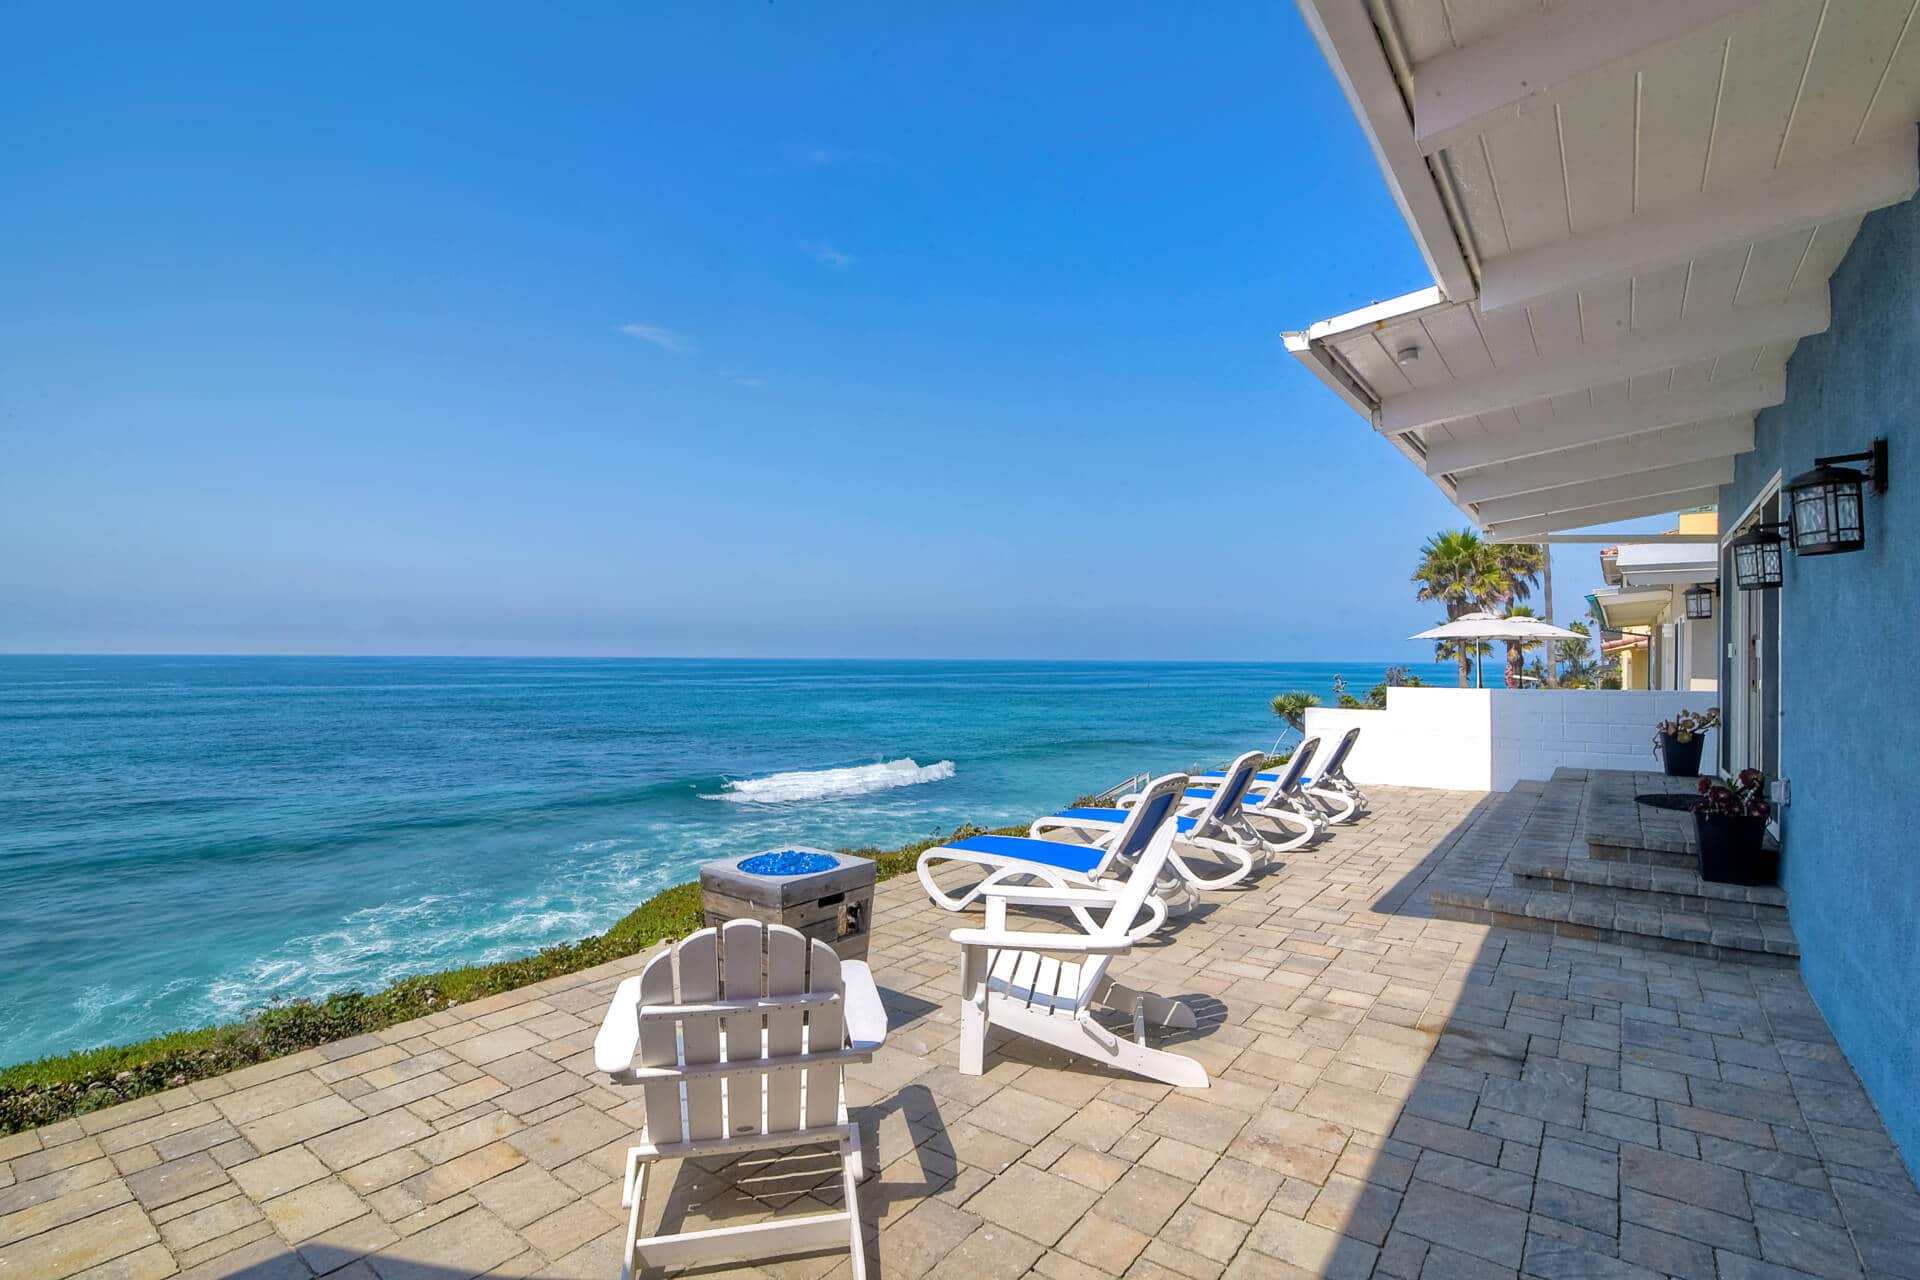 Haustay Vacation Rentals Shore Drive Oceanfront Home Carlsbad 